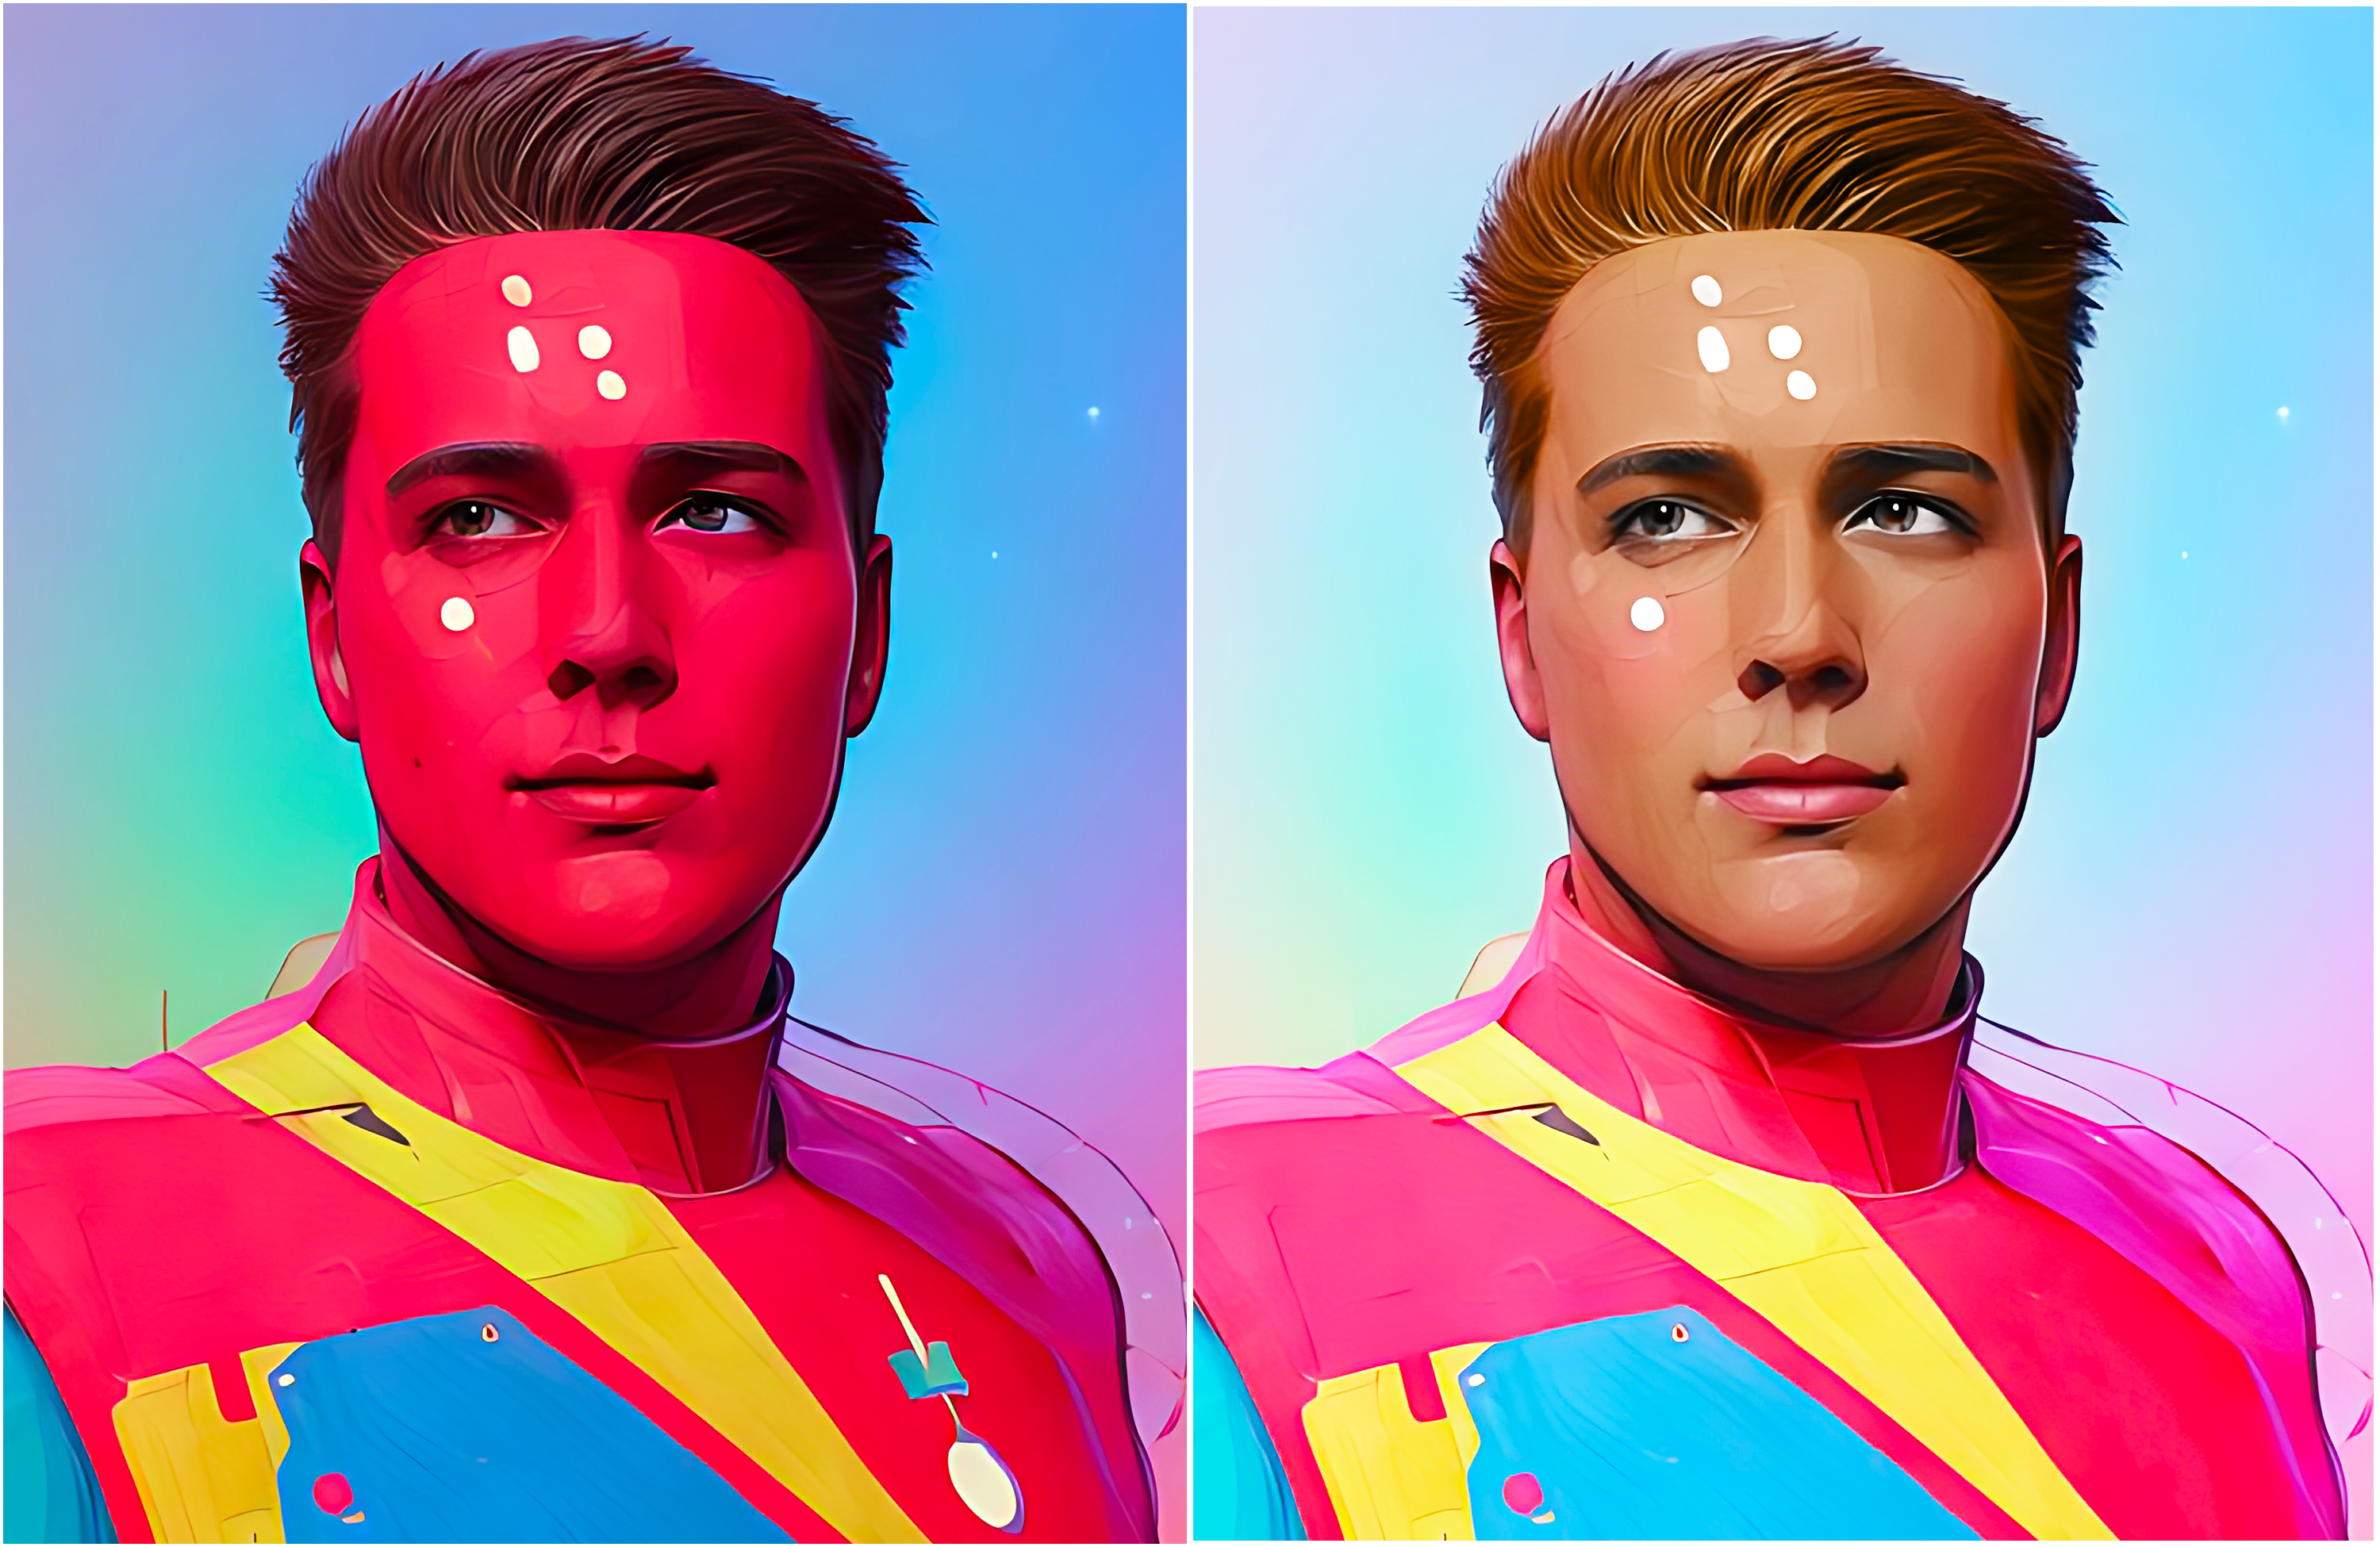 The before and after versions of the retouched AI portrait